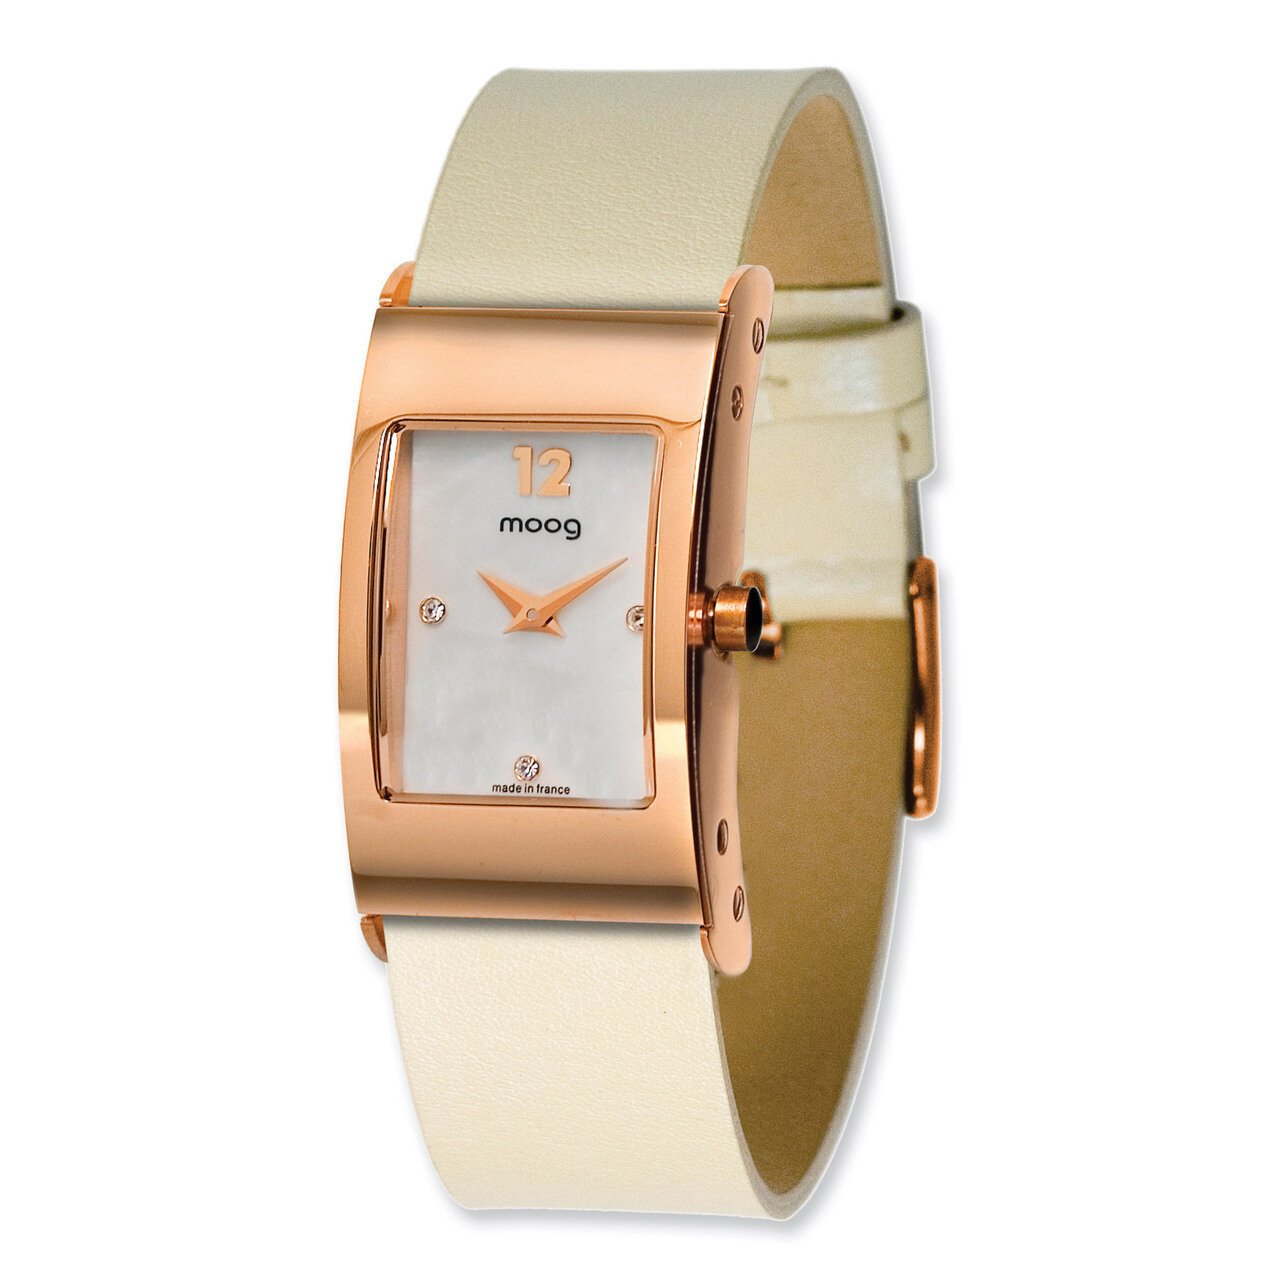 Moog Rectangle Domed Watch with (SC-04RG) White Band - Rose-plated